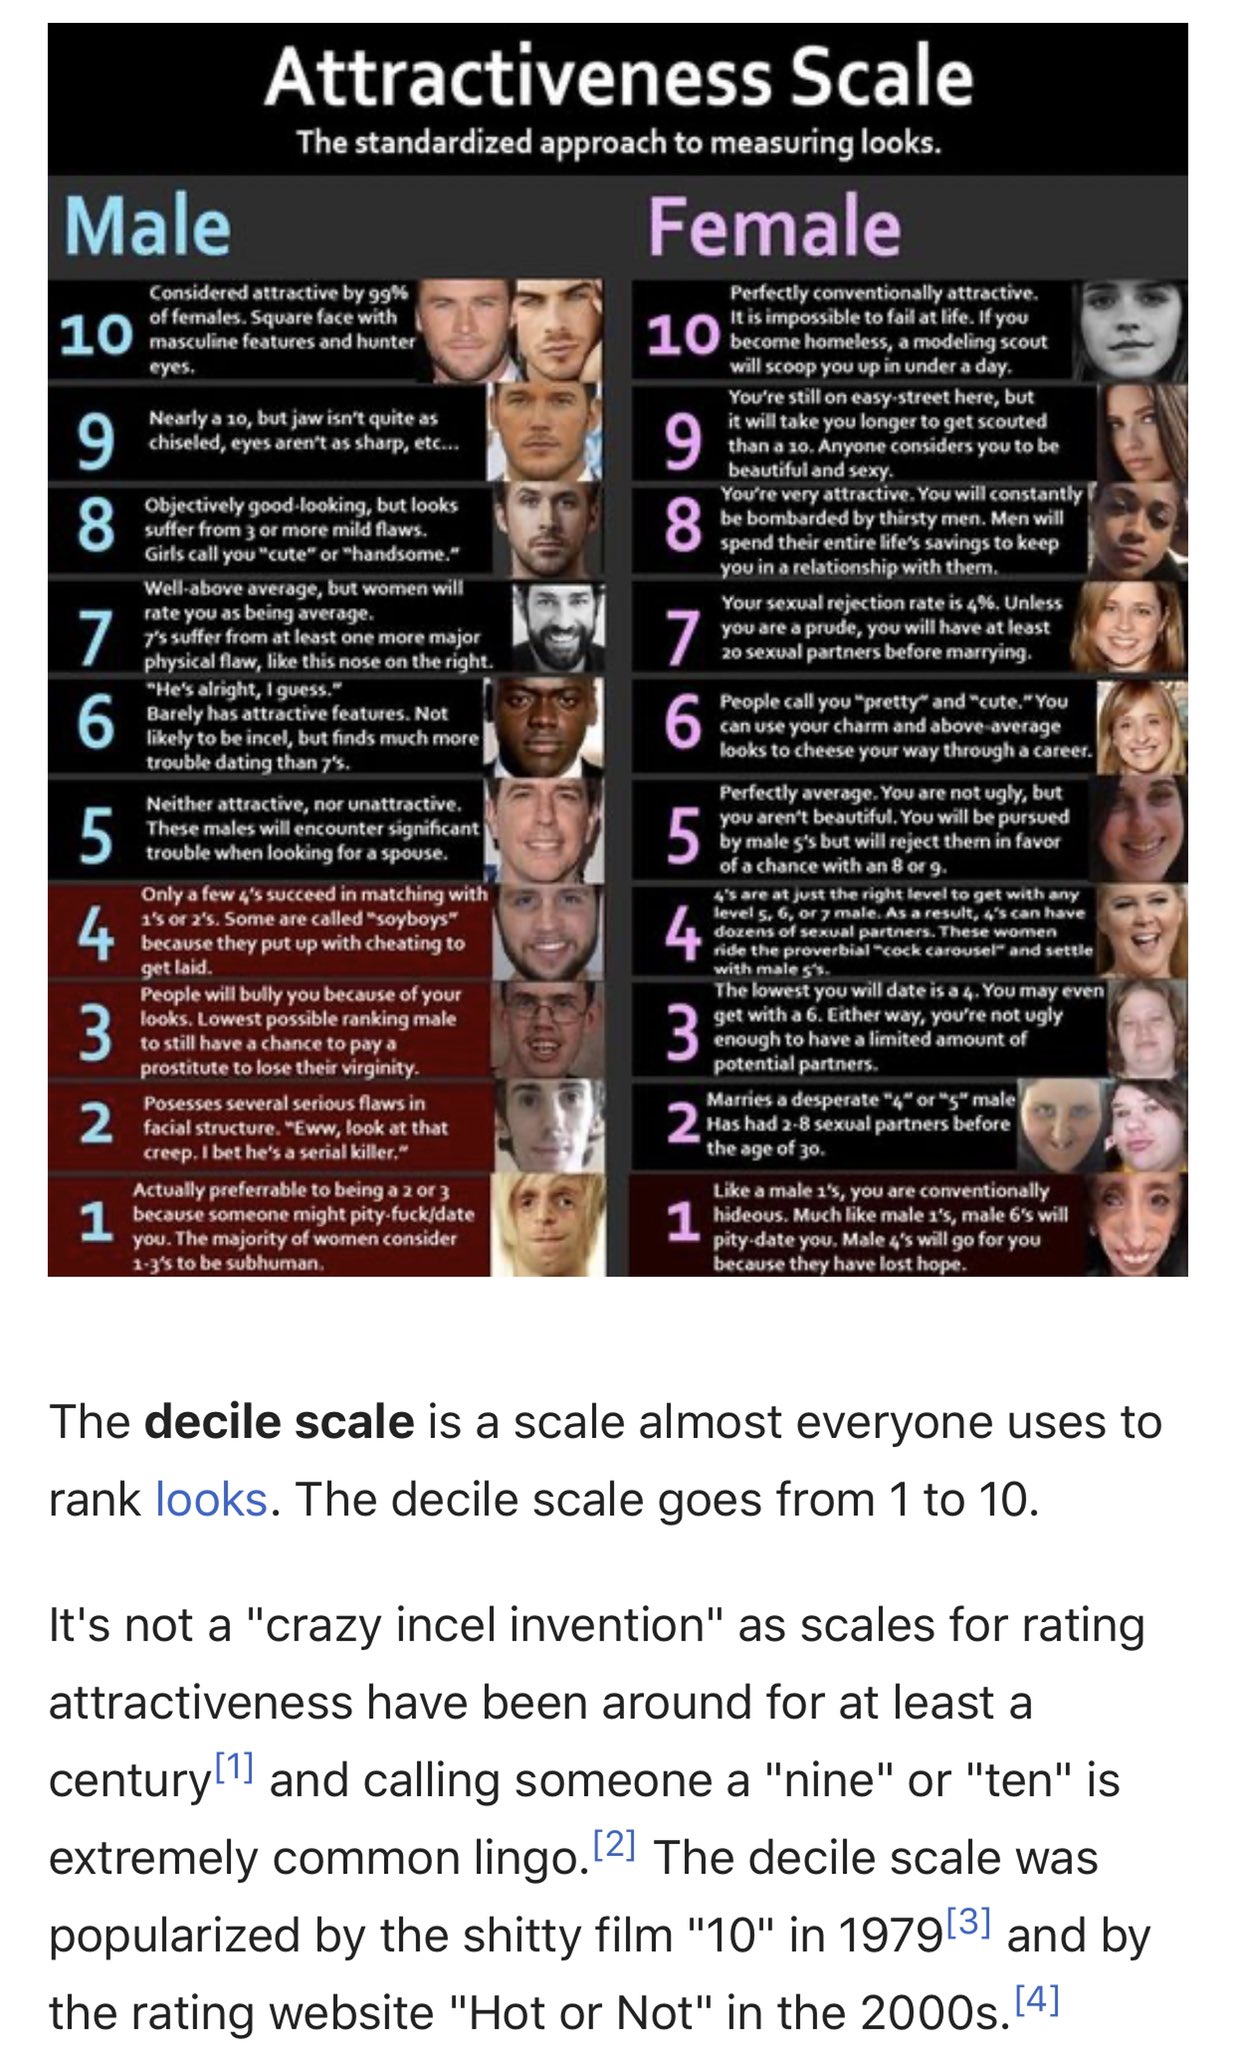 The attractiveness scale on tiktok is for both men and women. 